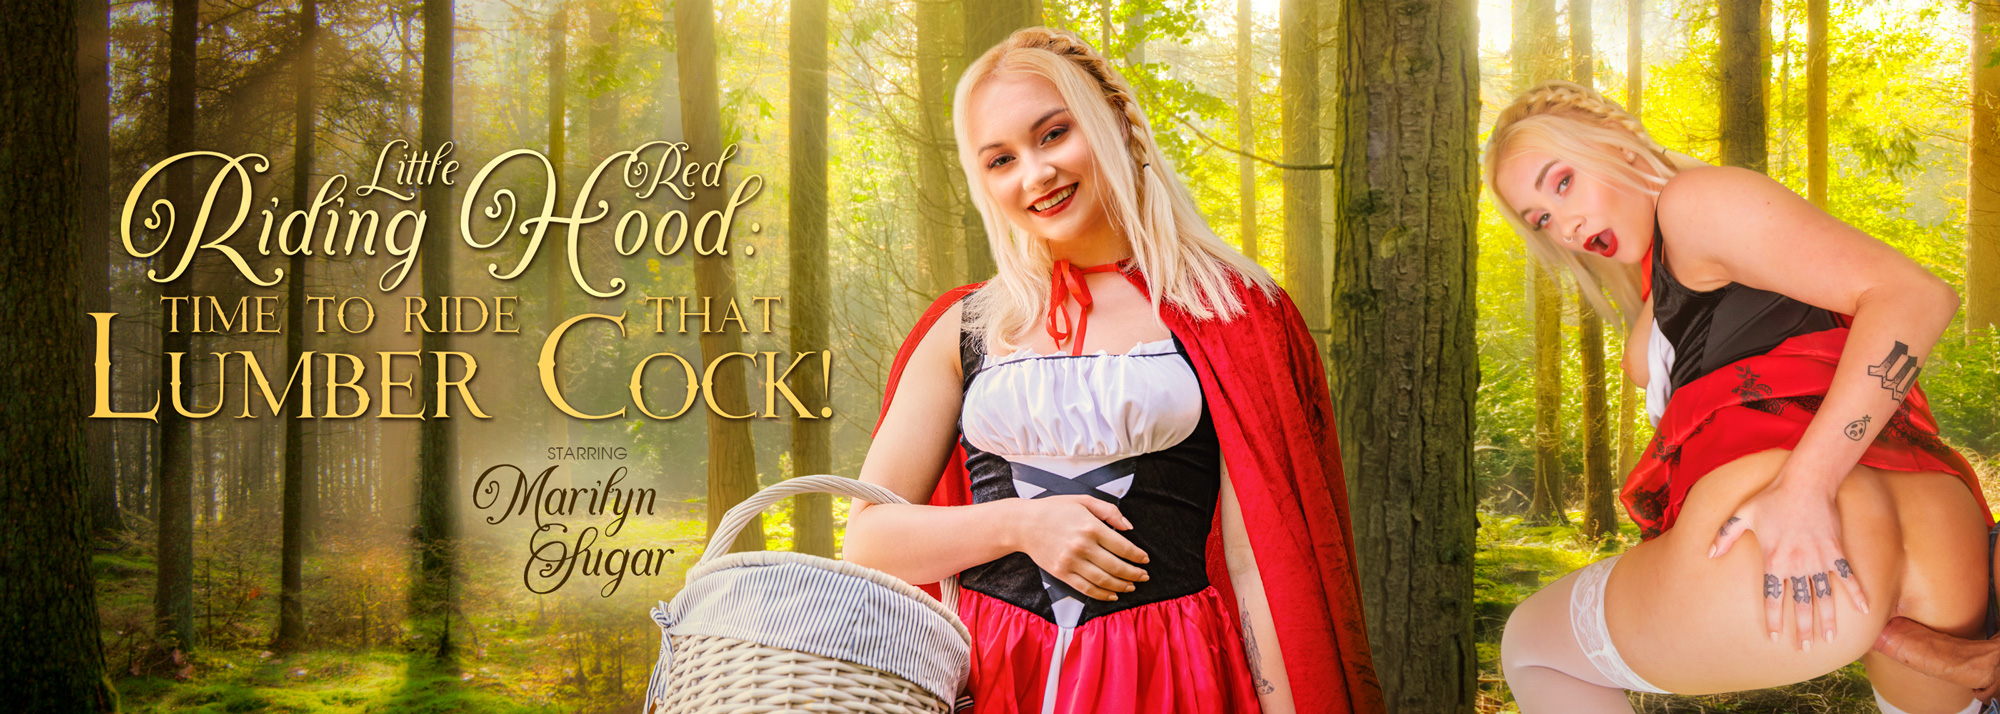 Little Red Riding Hood: Time to Ride That Lumber Cock! - VR Porn Video, Starring: Marilyn Sugar